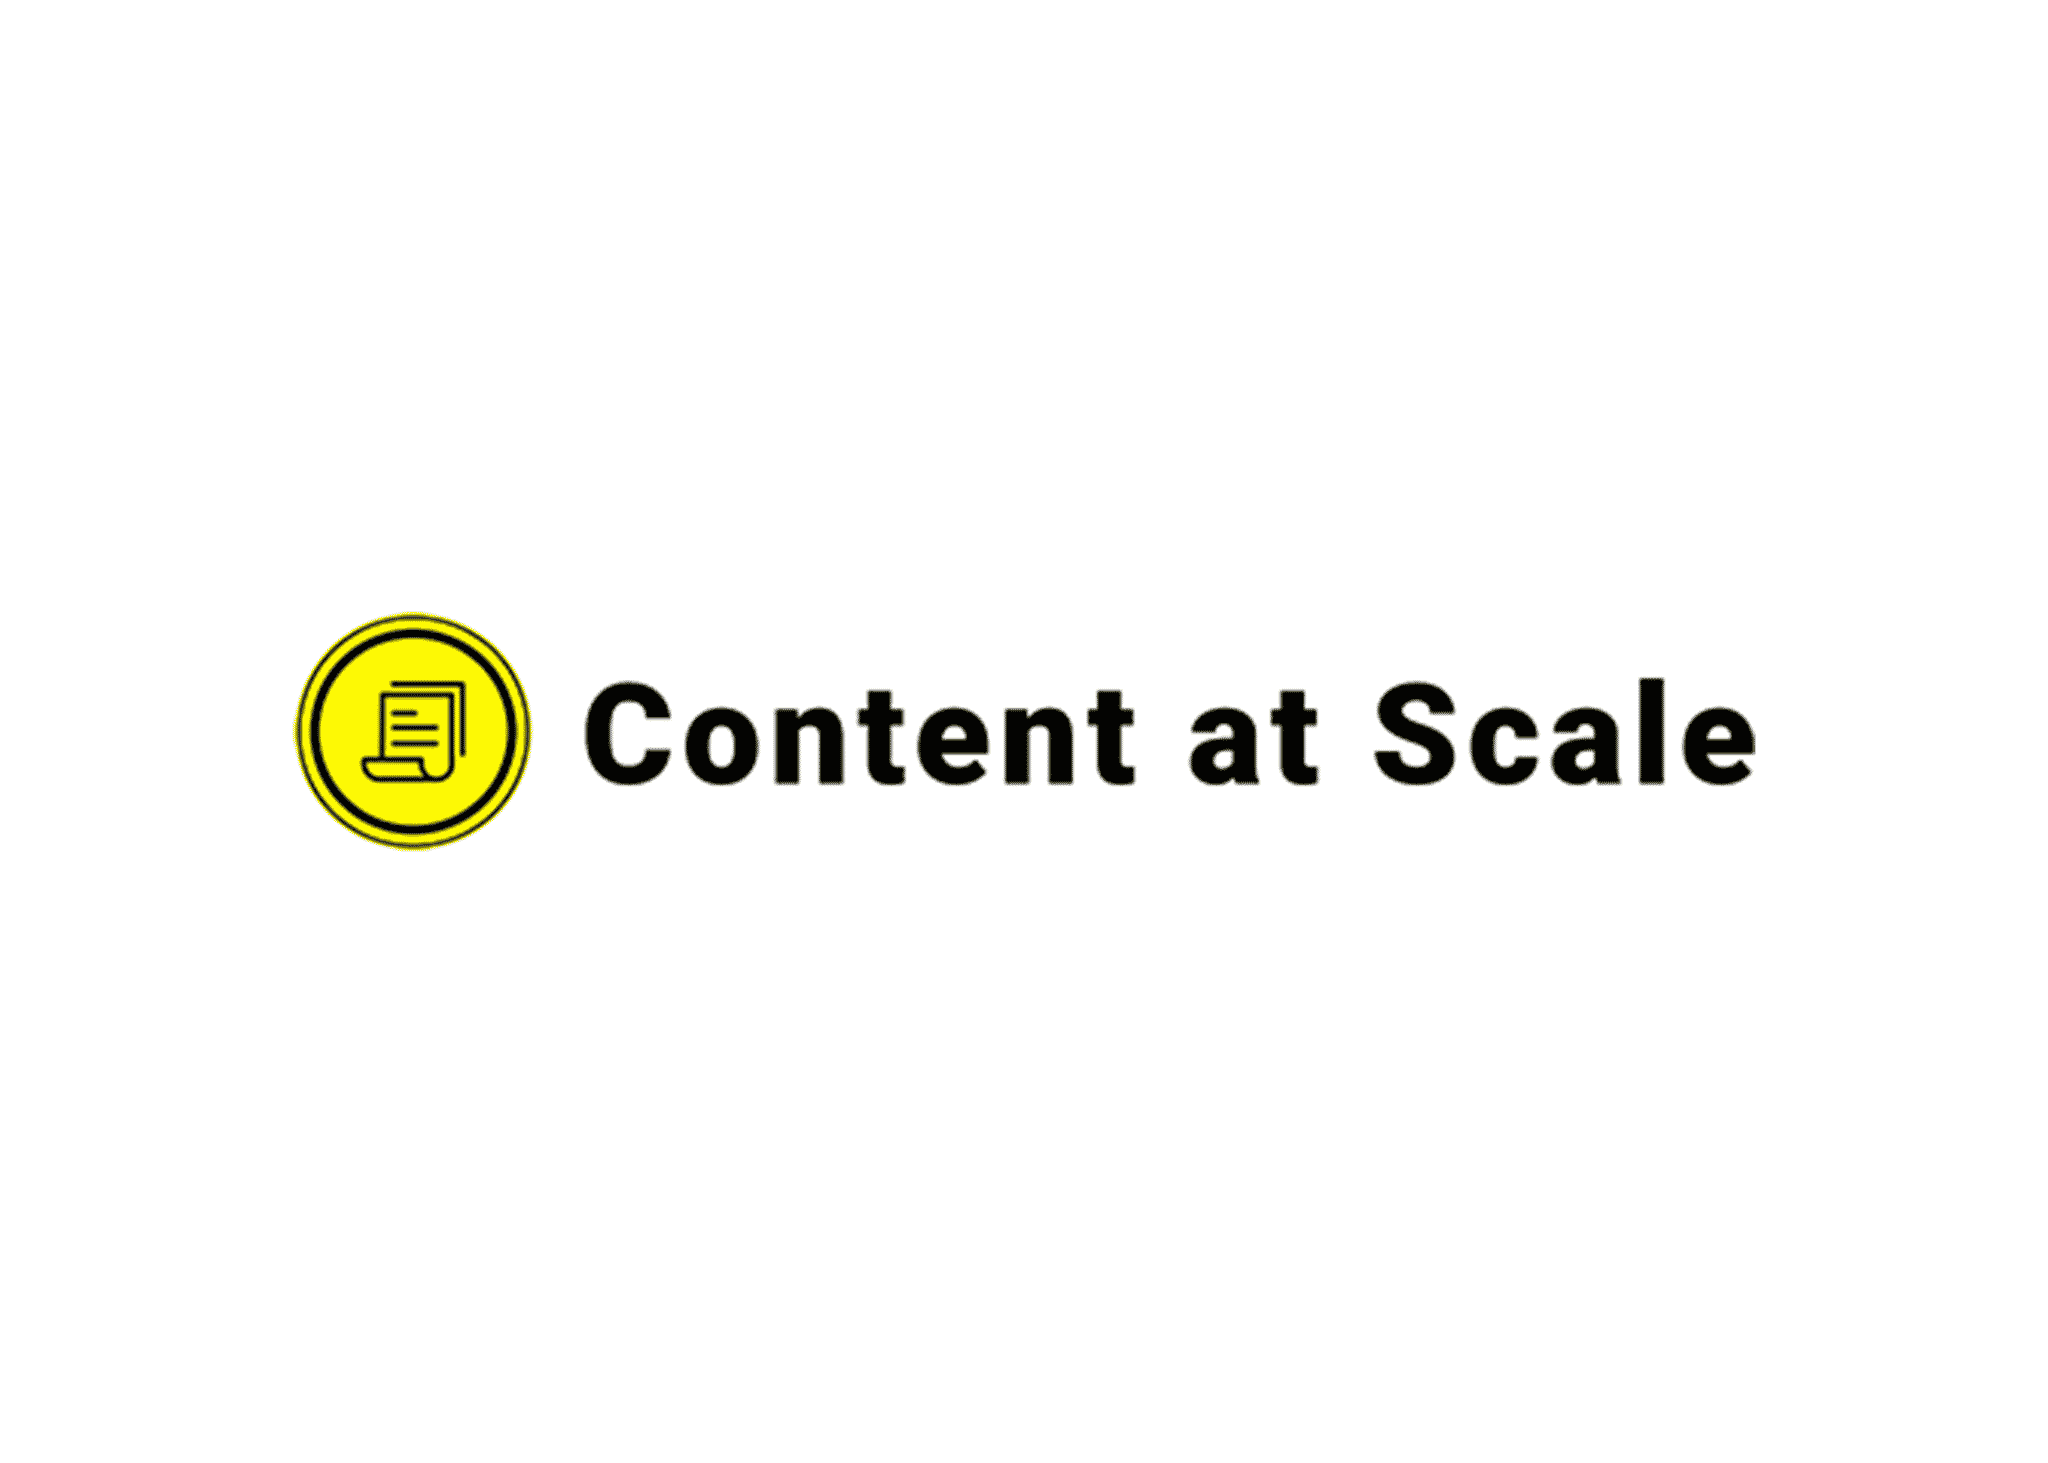 Content at Scale: An AI Tool for Long Form Content